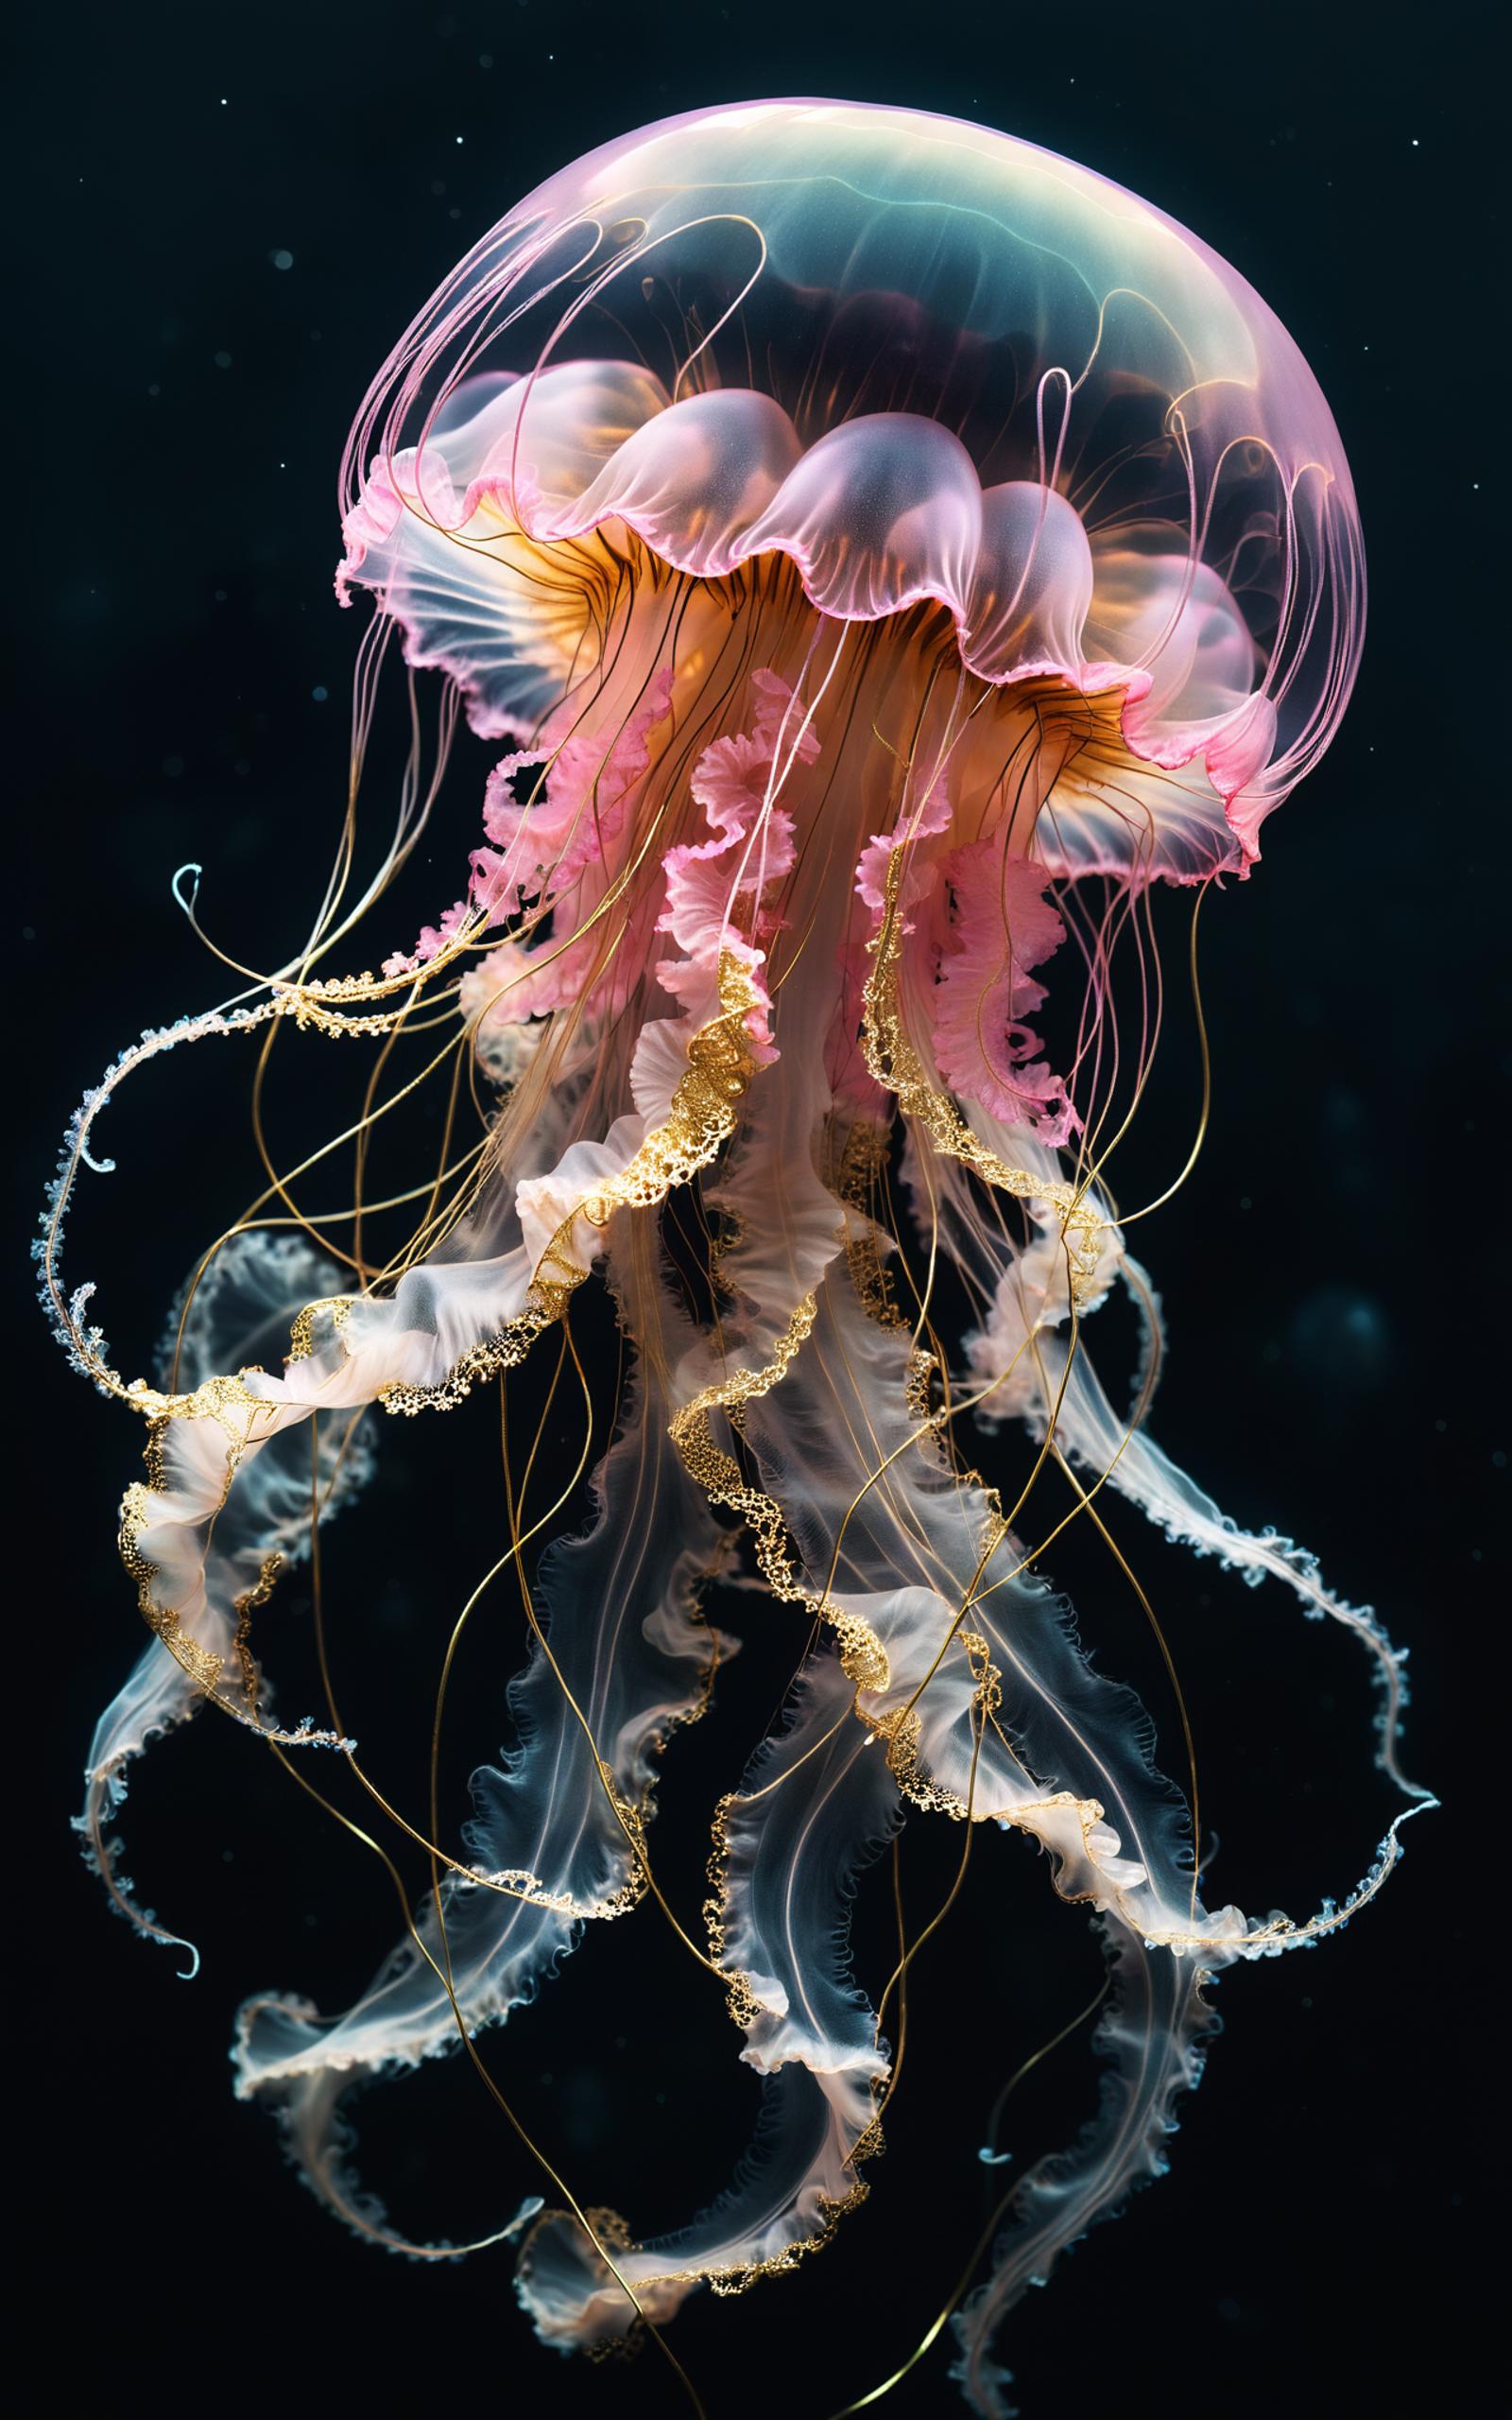 A close-up image of a large pink and white jellyfish floating in the ocean.